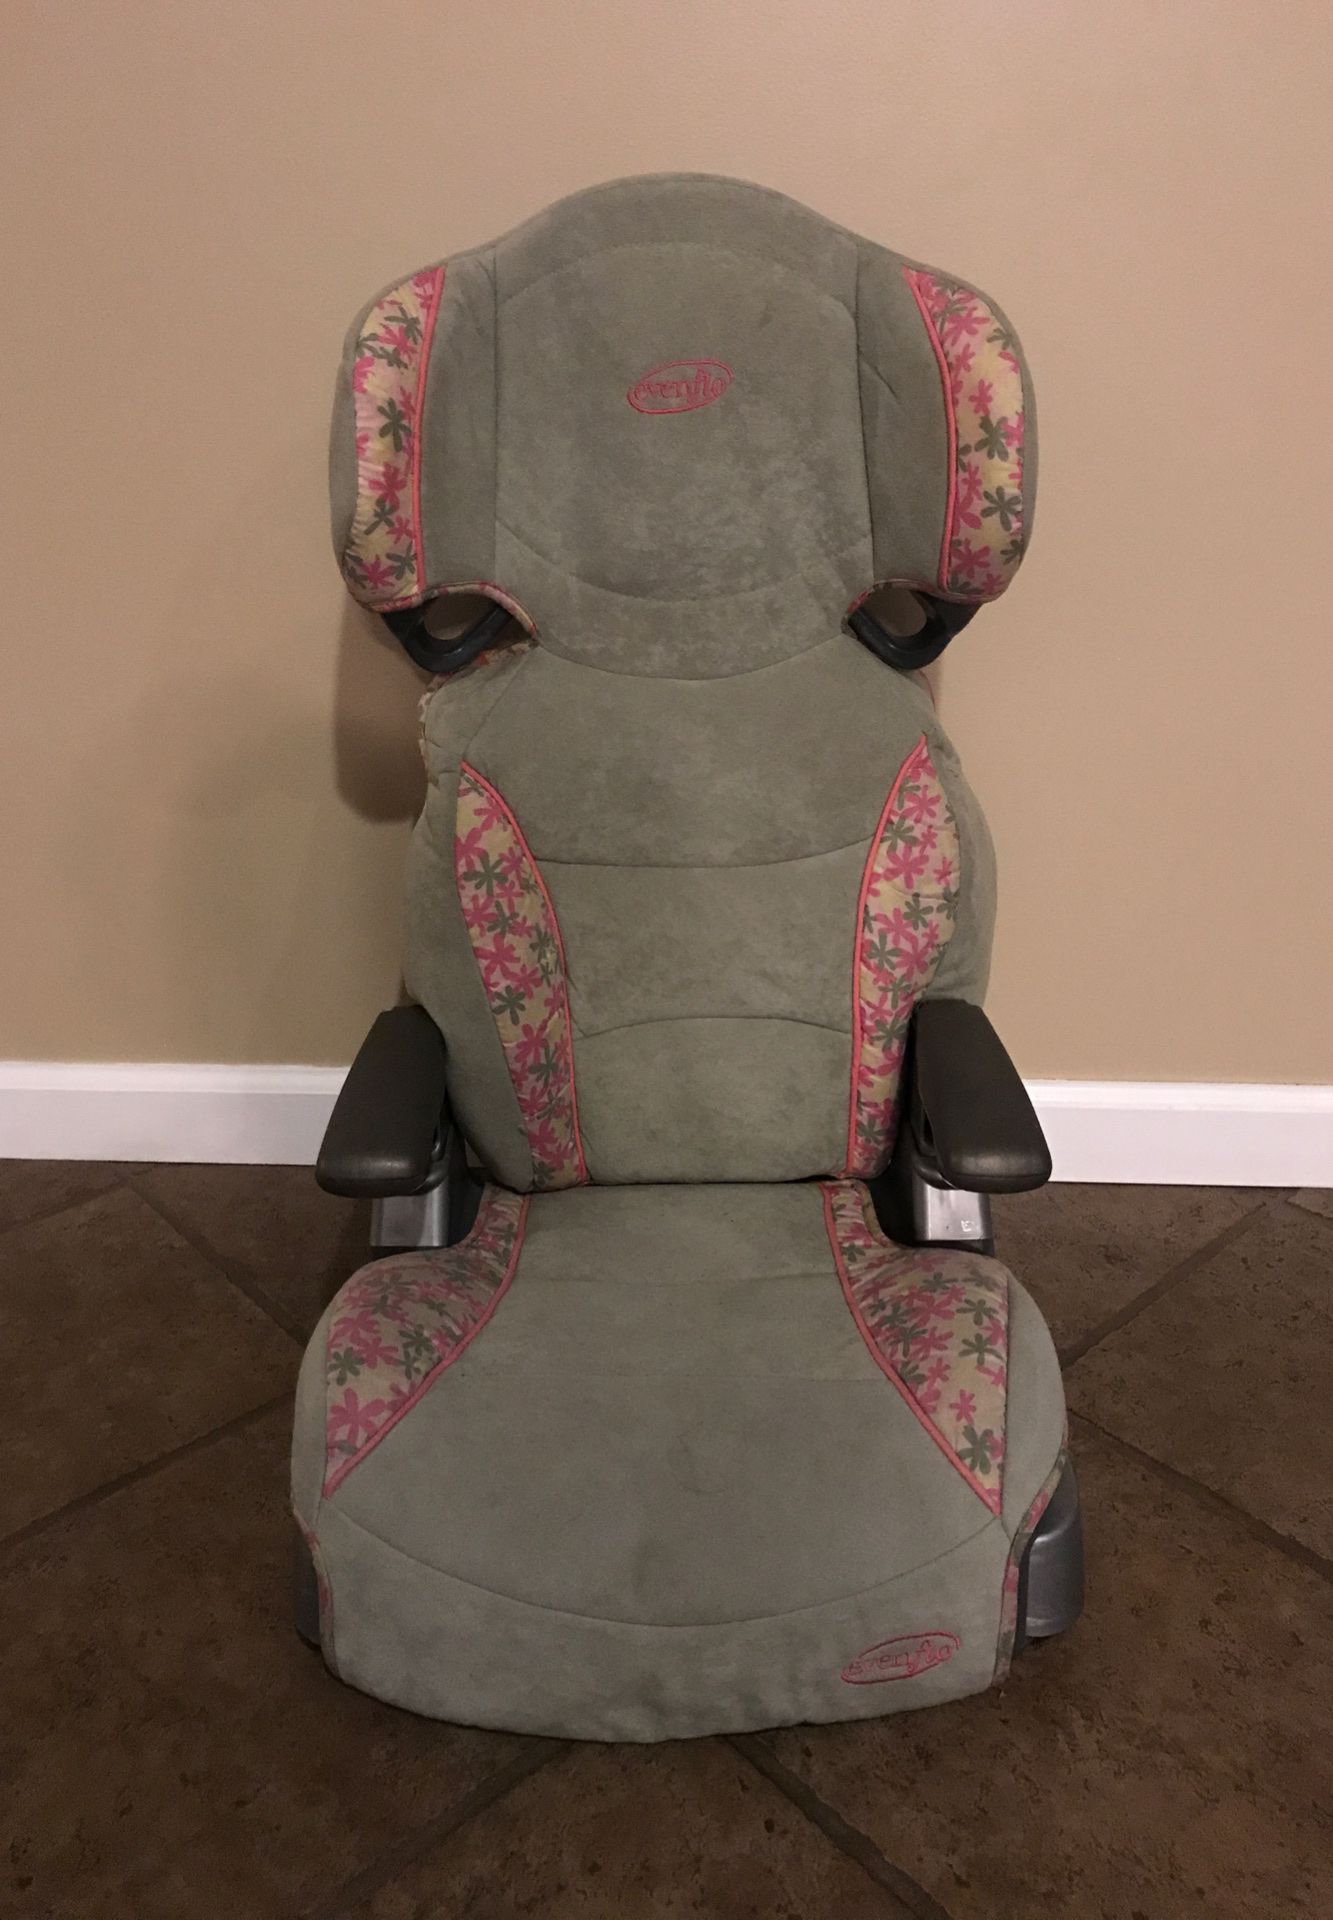 Evenflo Car booster seat